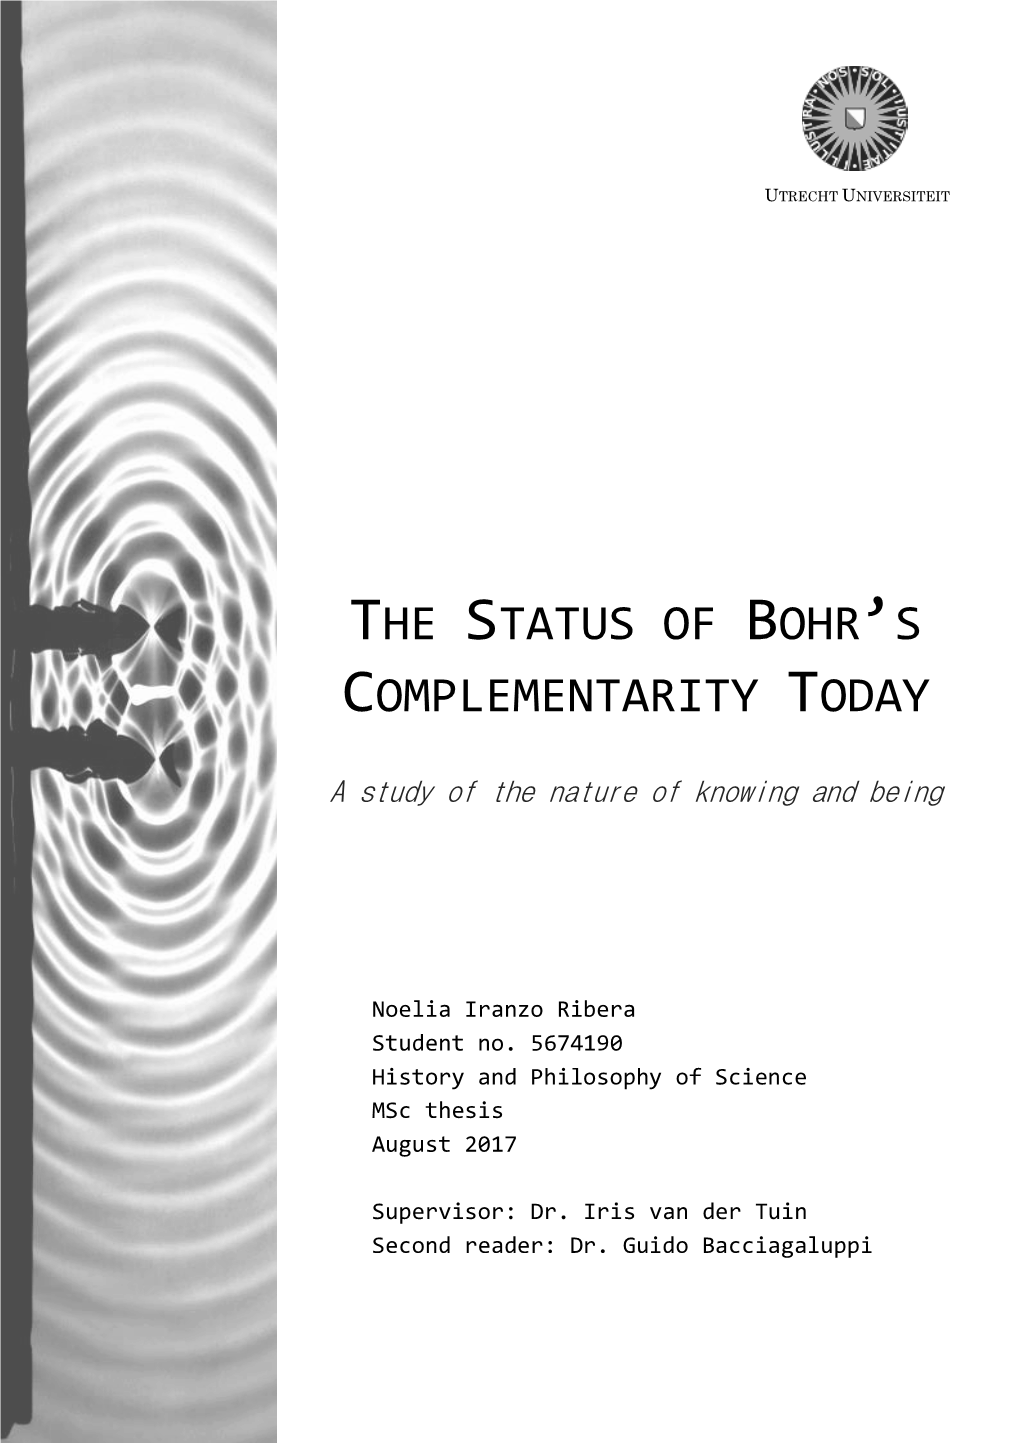 The Status of Bohr's Complementarity Today